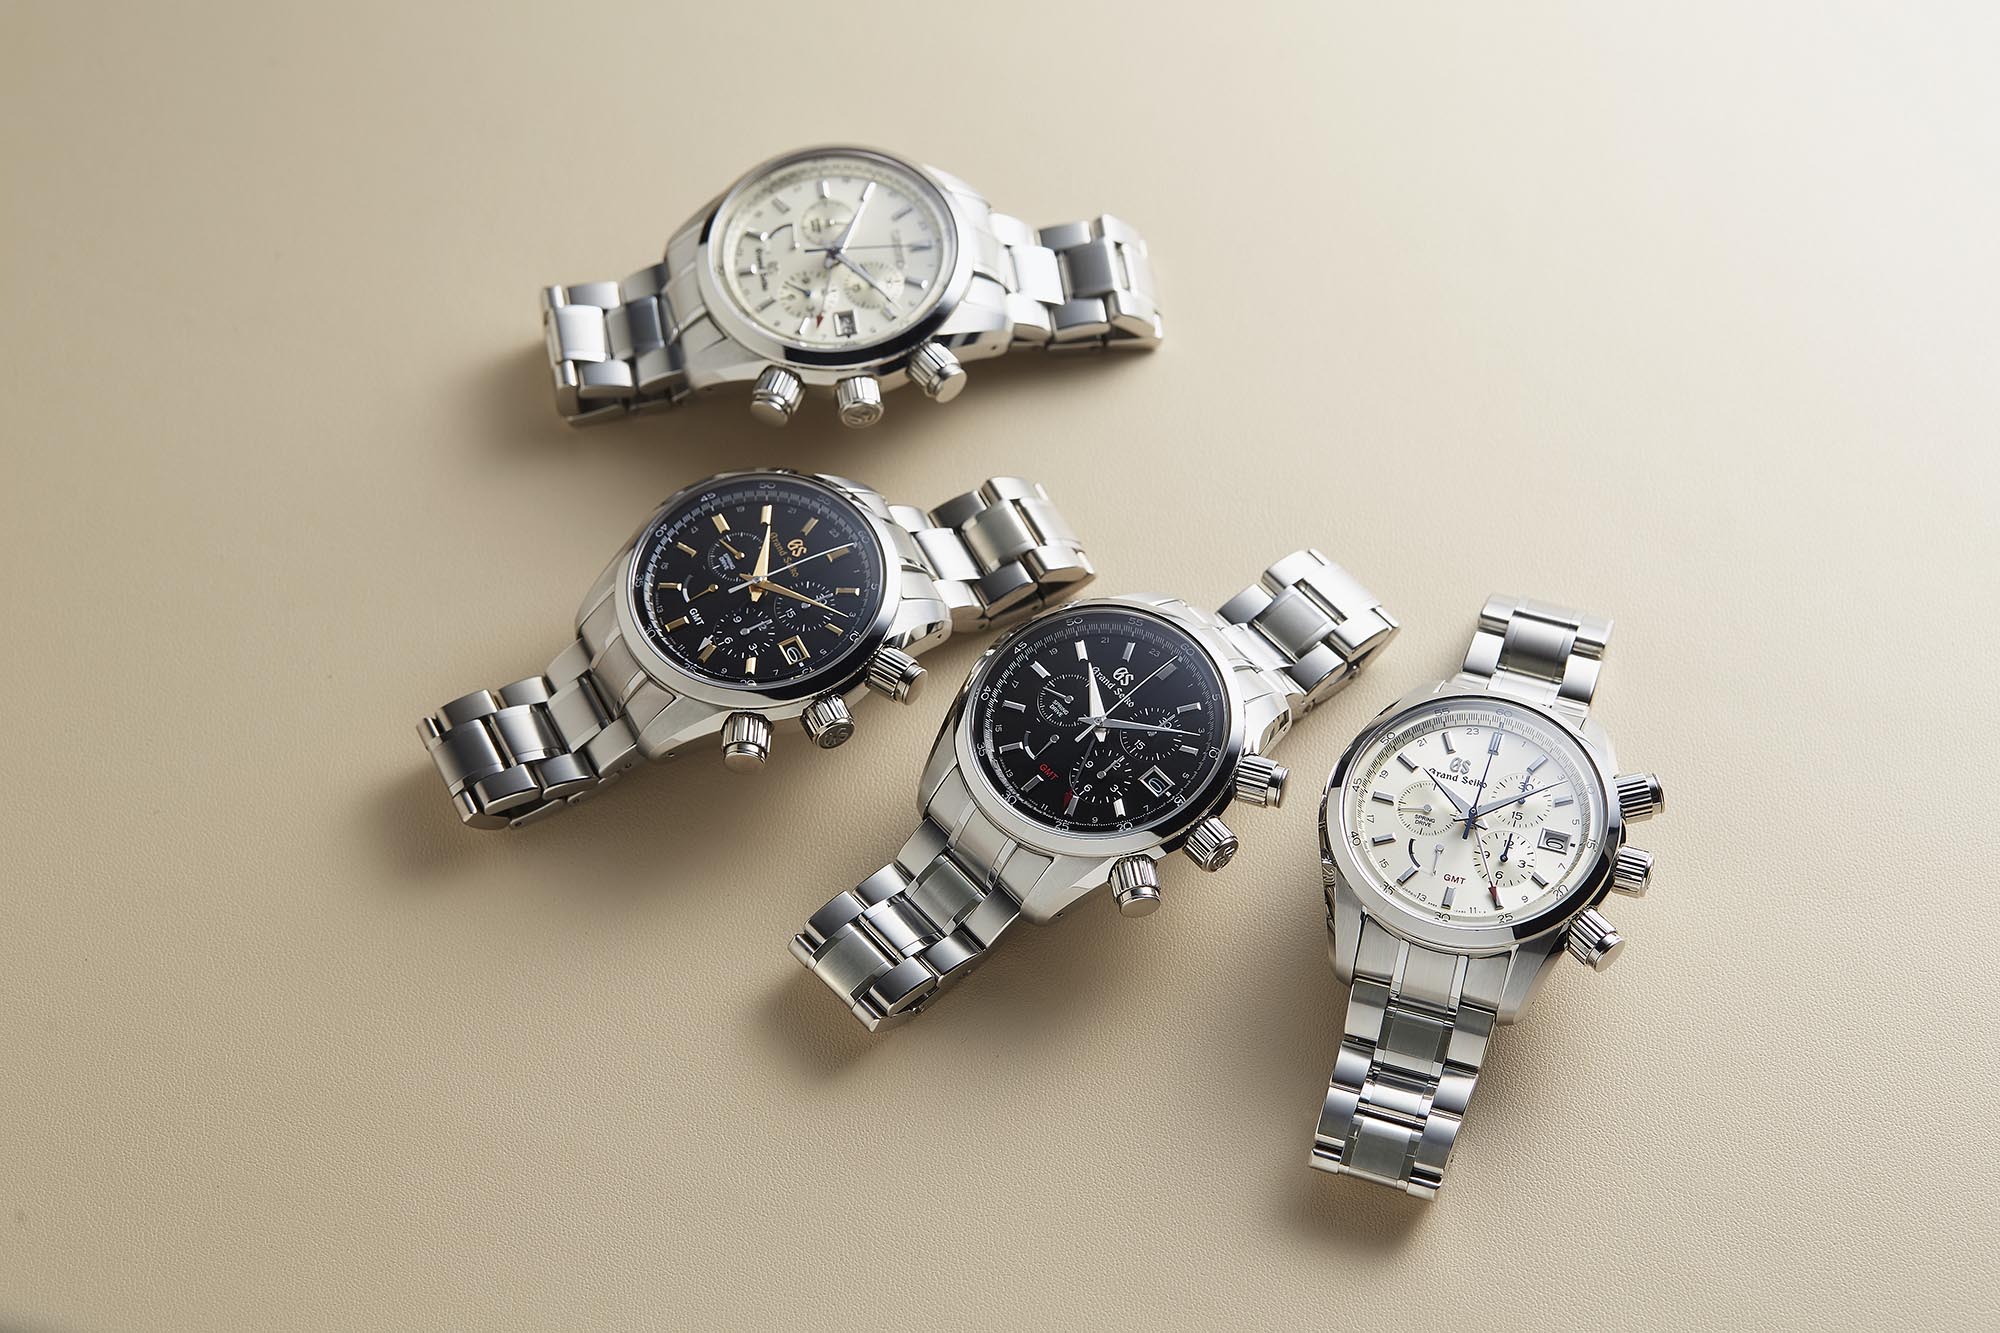 Tradition Meets Innovation: The Grand Seiko Spring Drive Chronograph GMT |  GS9 Club (ประเทศไทย) : GS9 Club (ประเทศไทย)